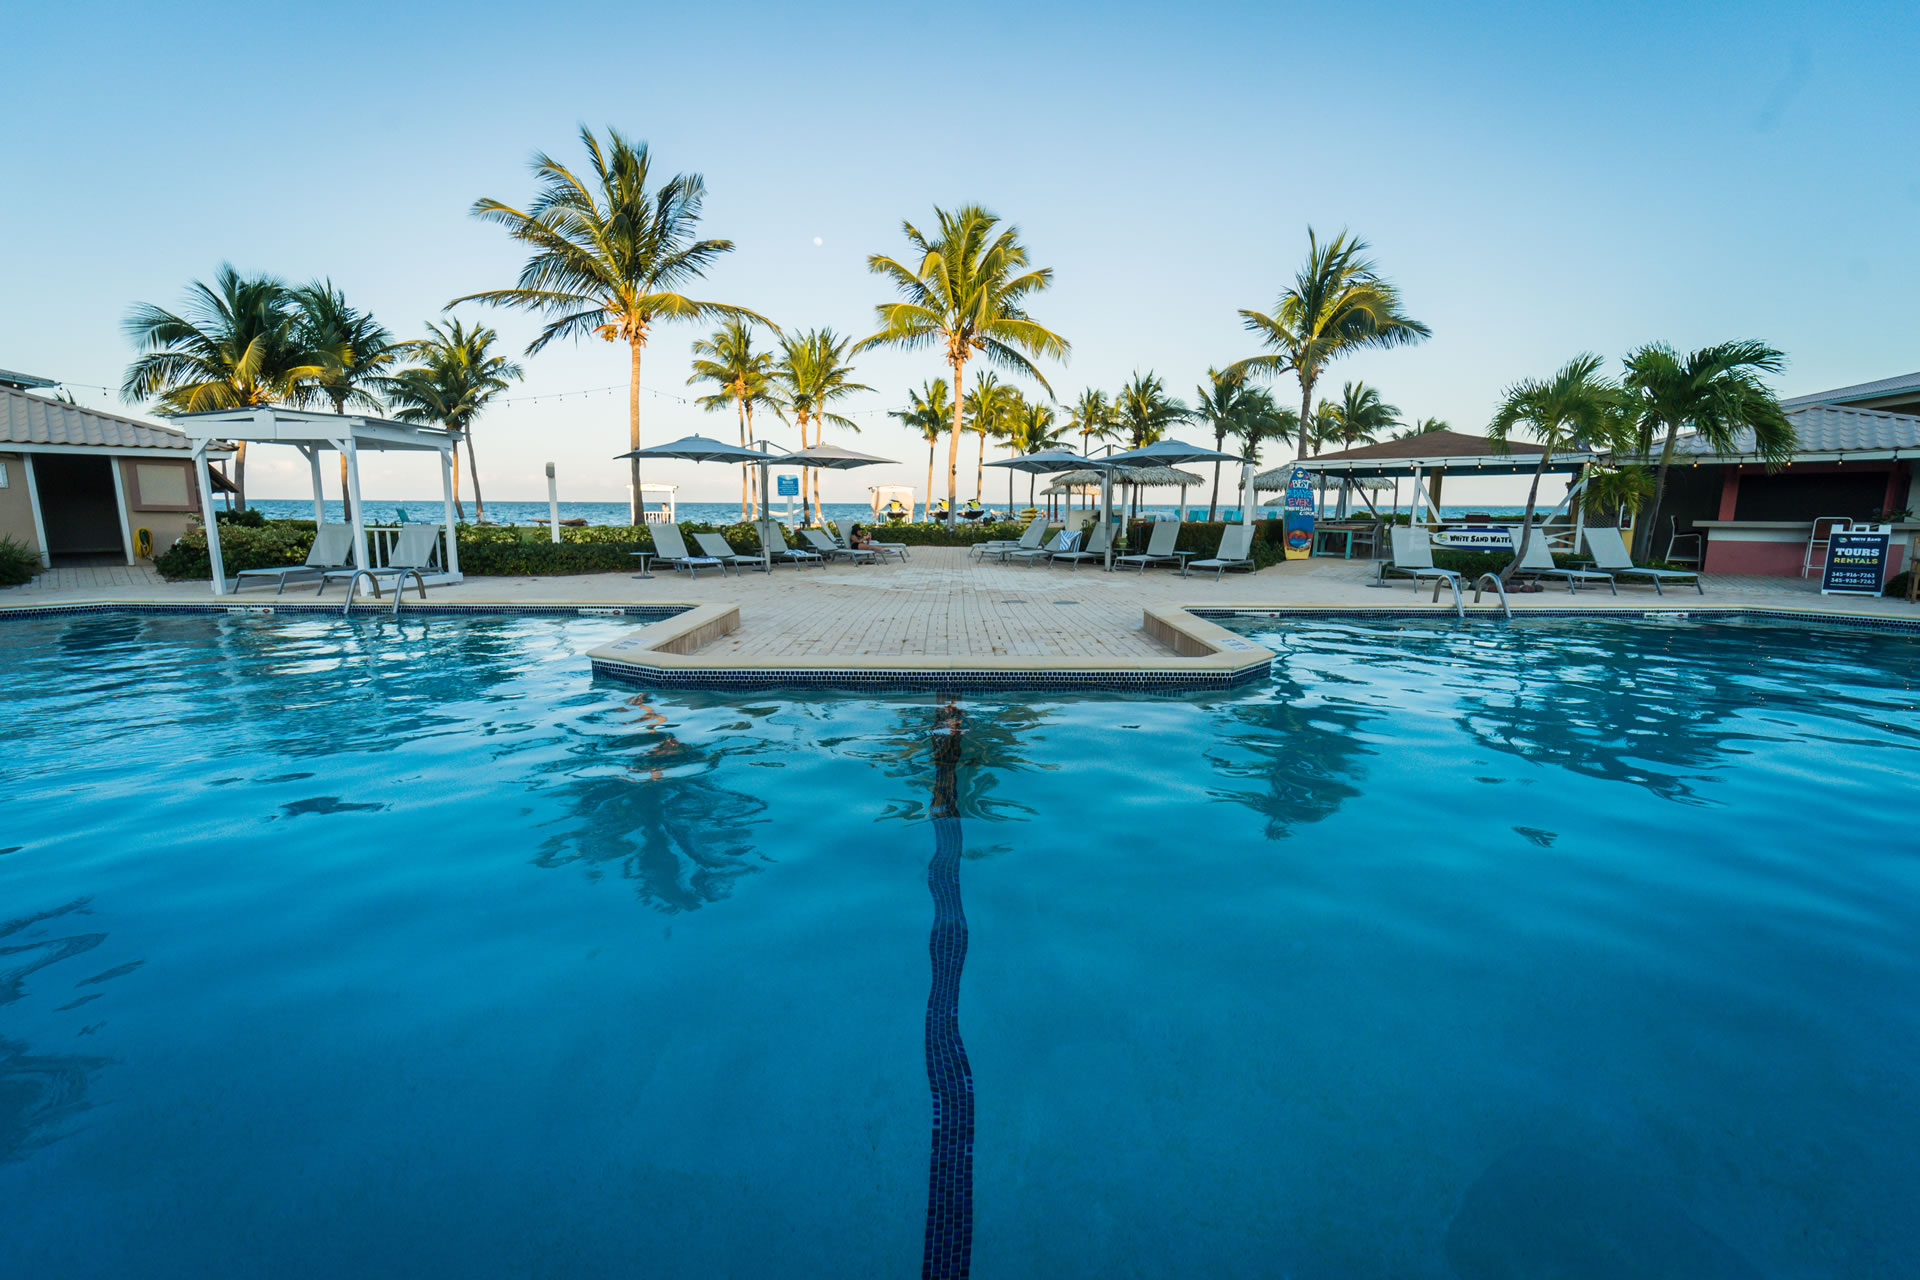 Close up of the pool at the Grand Caymanian Resort.